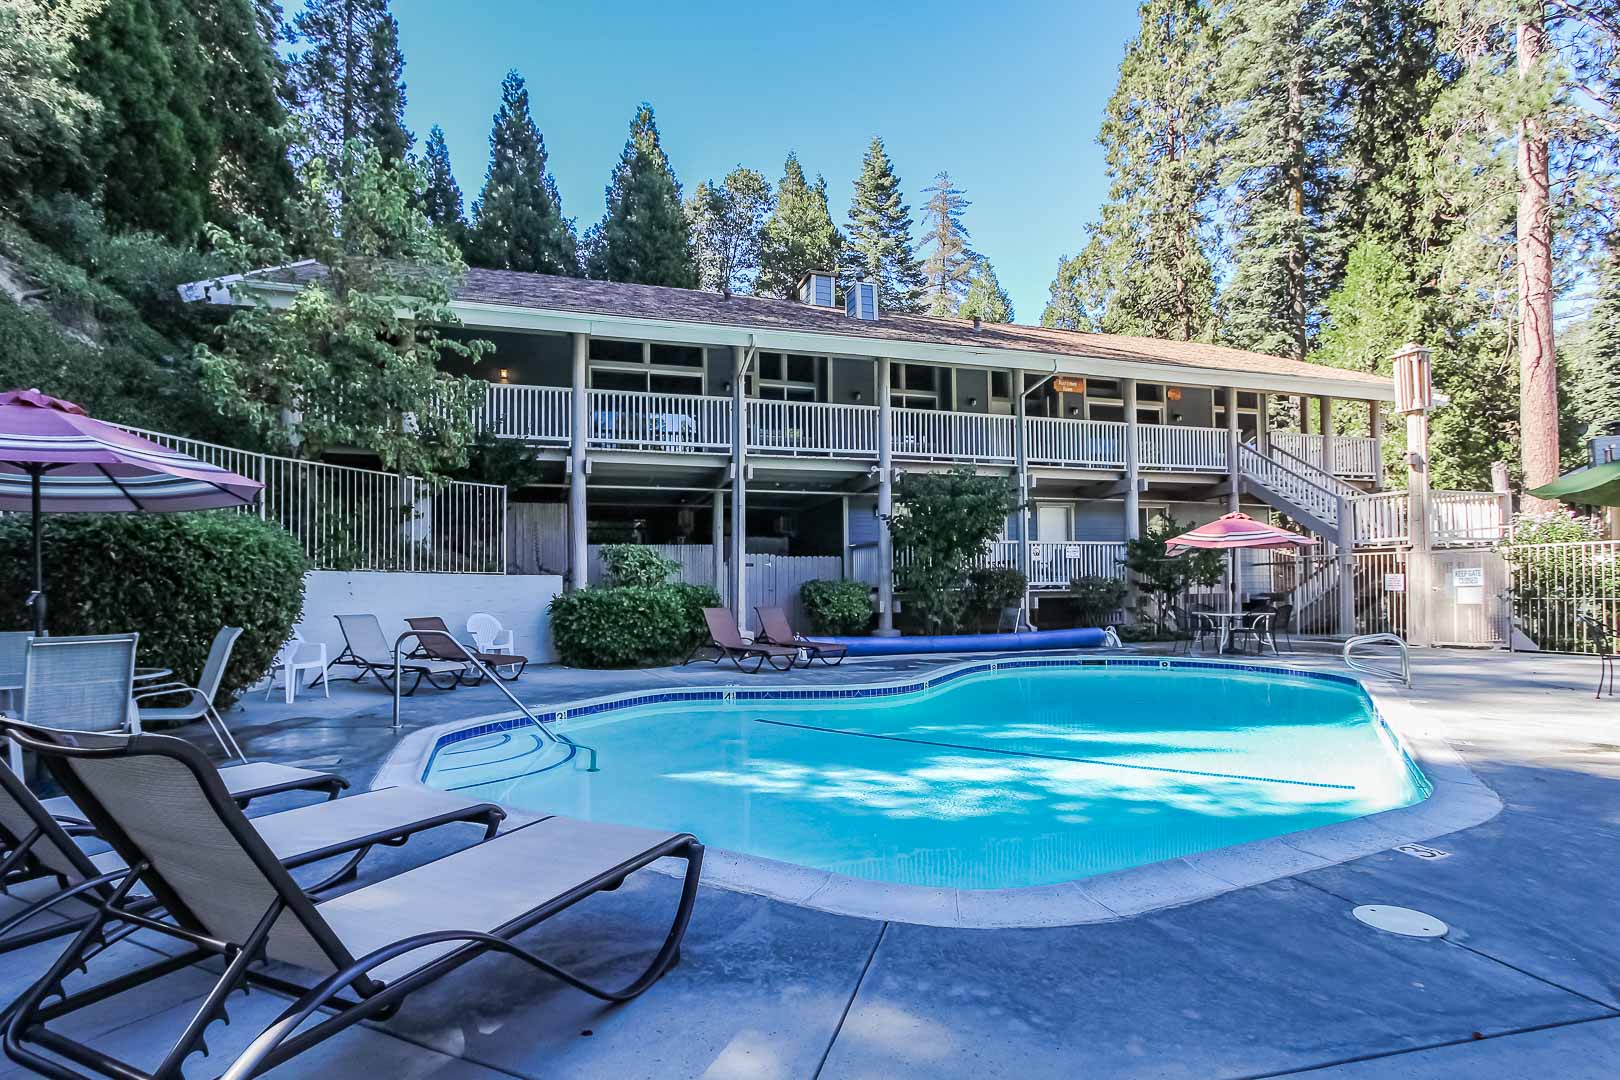 A peaceful view of the outdoor swimming pool at VRI's Lake Arrowhead Chalets in California.